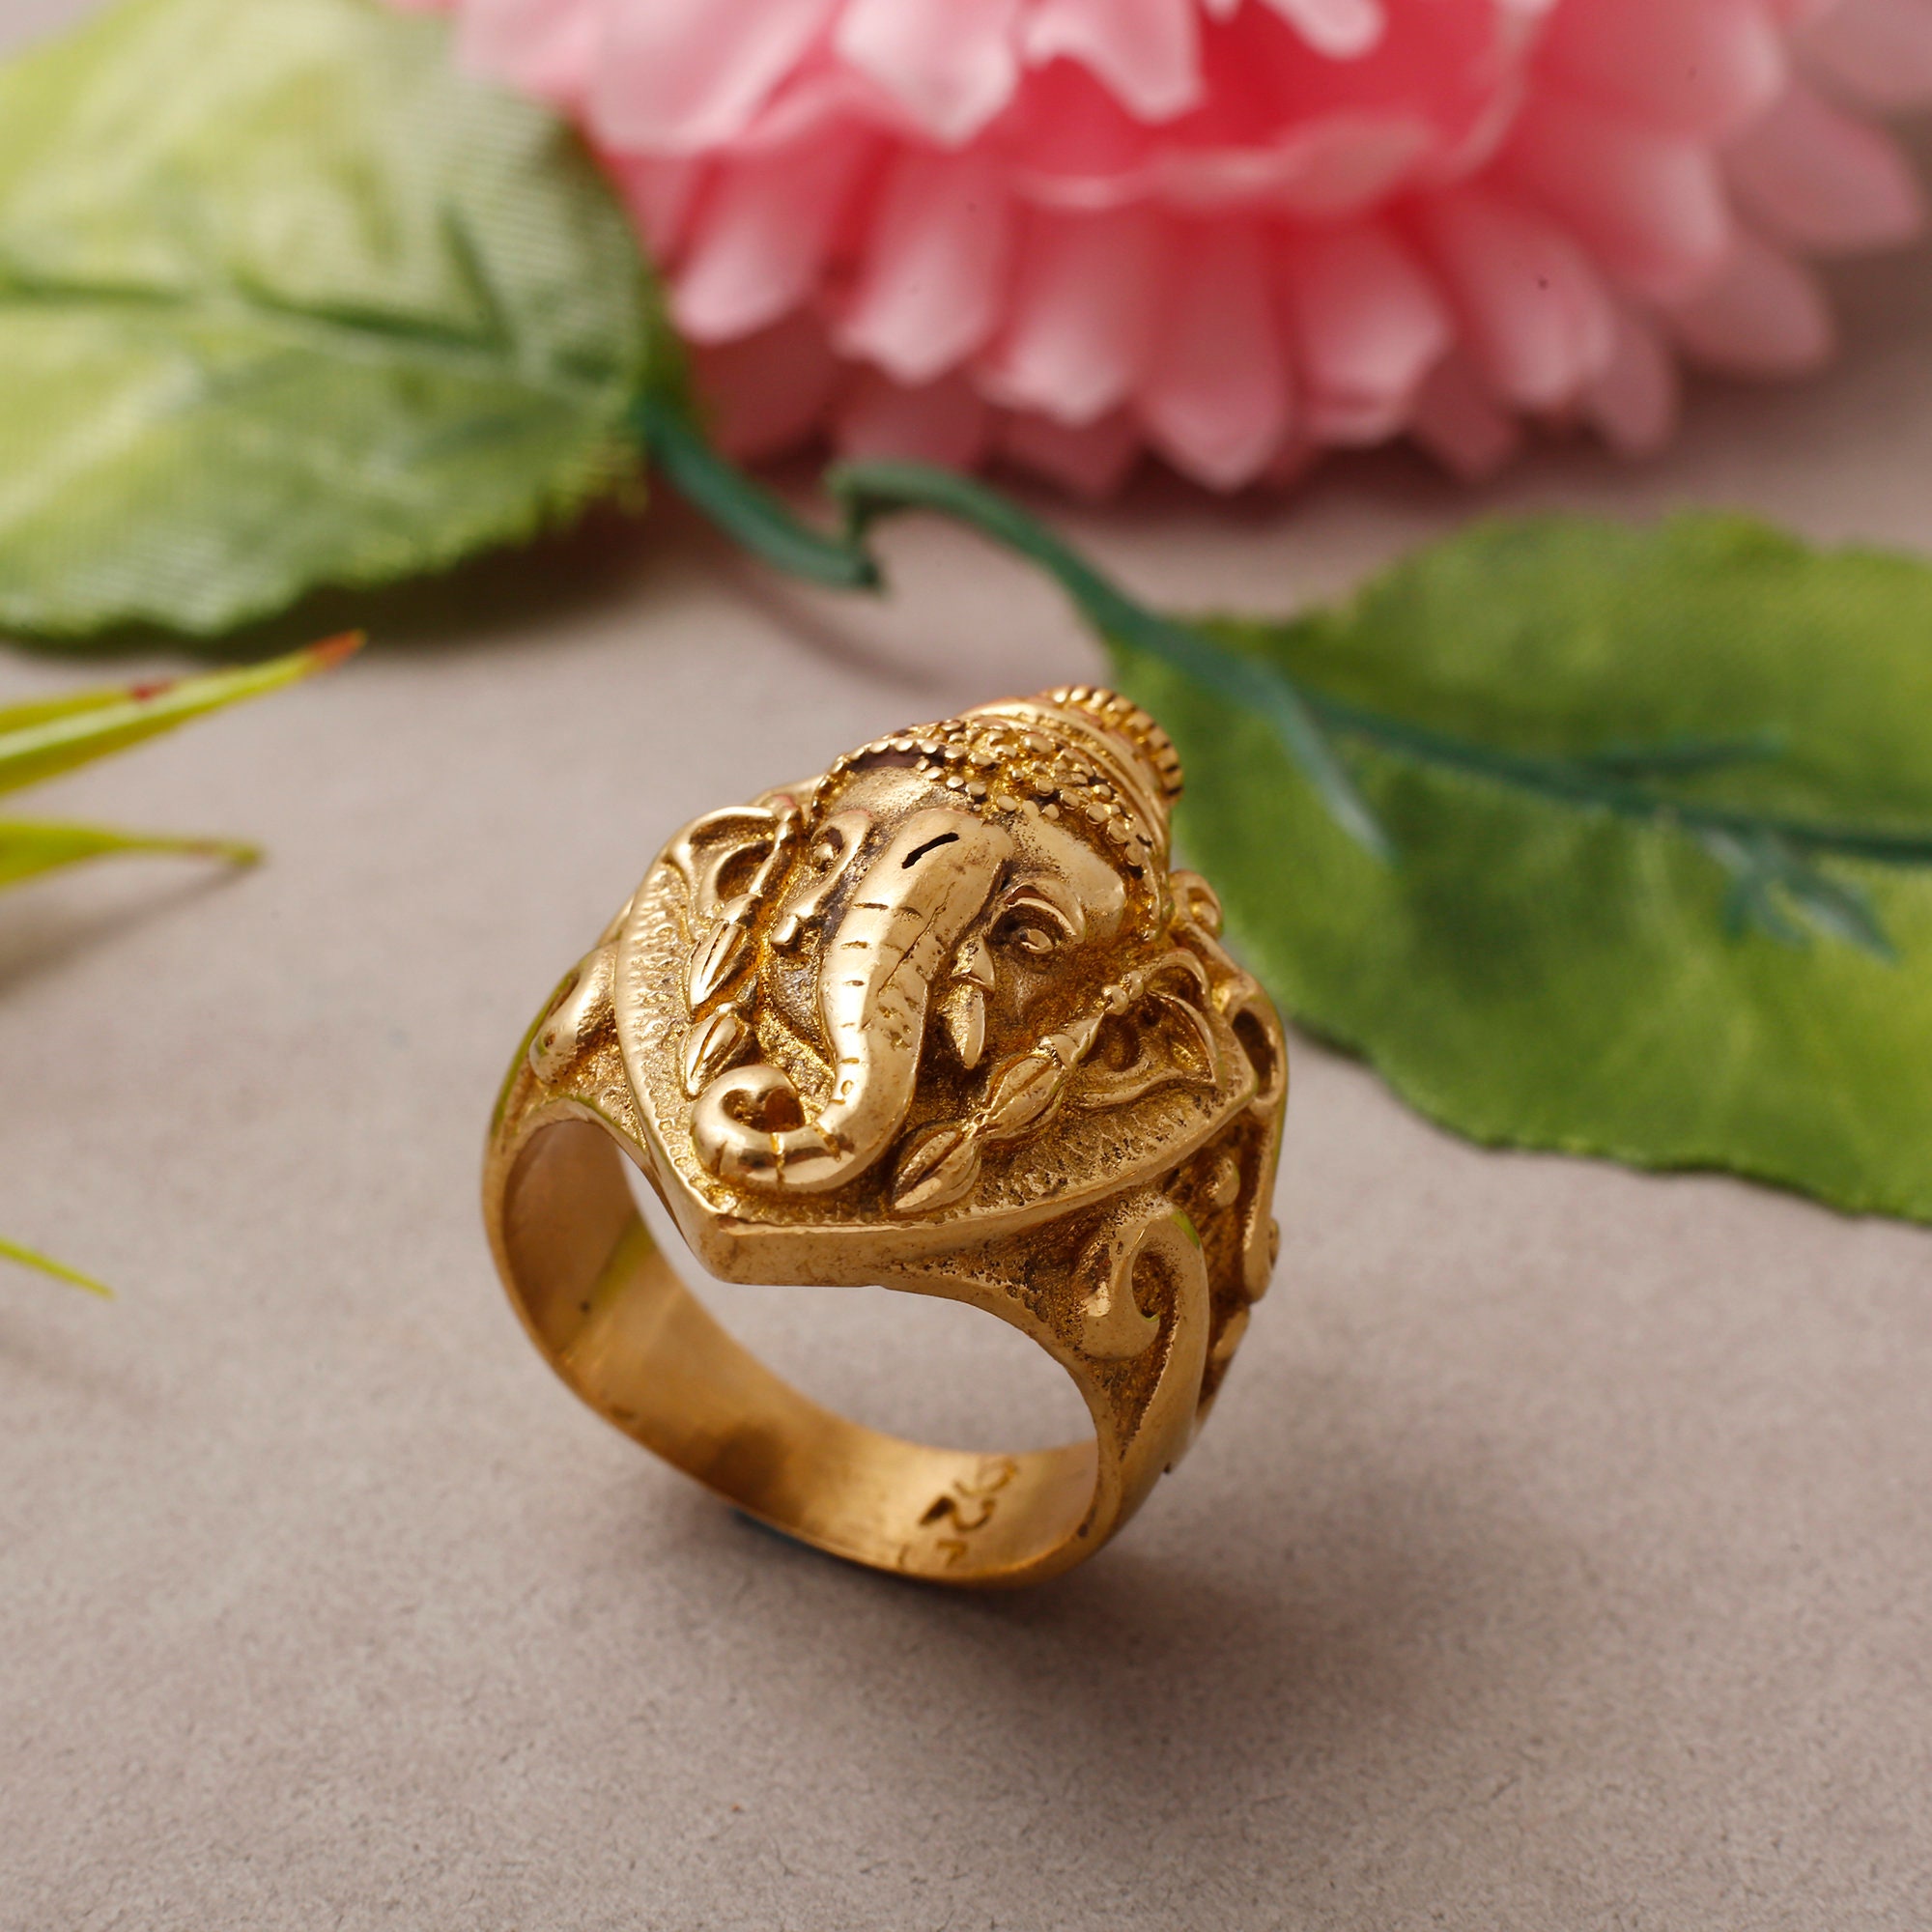 Lord Ganesha Ring, Religious Brass Ring, Handmade Ring, Gold Vinayak Ring,  Vintage Rings, Good Luck Ring, Lord Shiva Son Ring, Gold Jewelry - Etsy